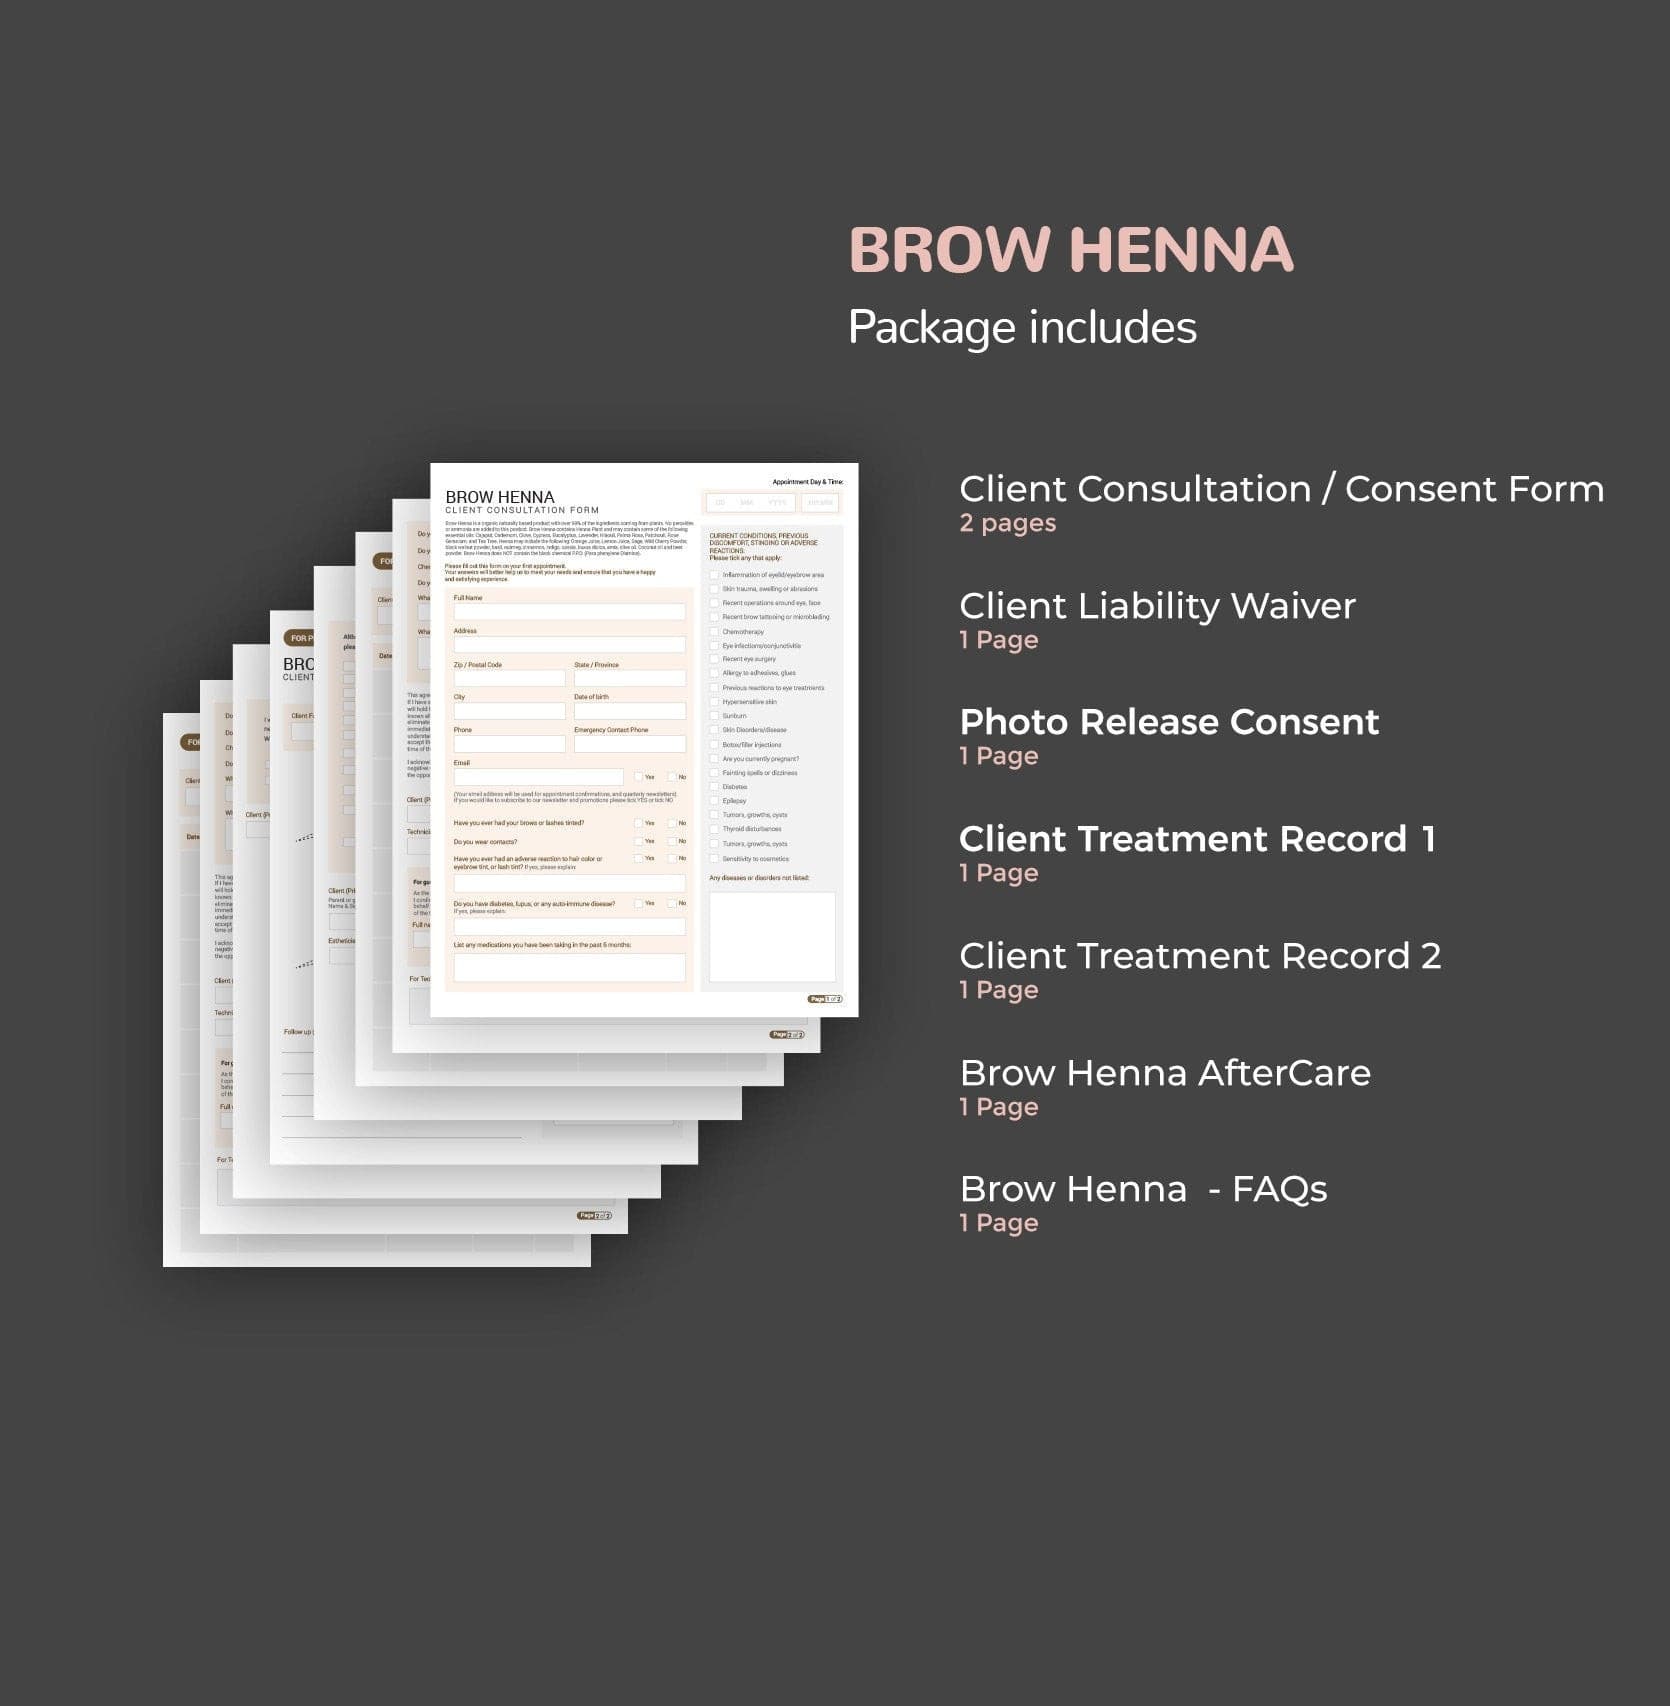 Brow Henna Consultation & Consent-forms